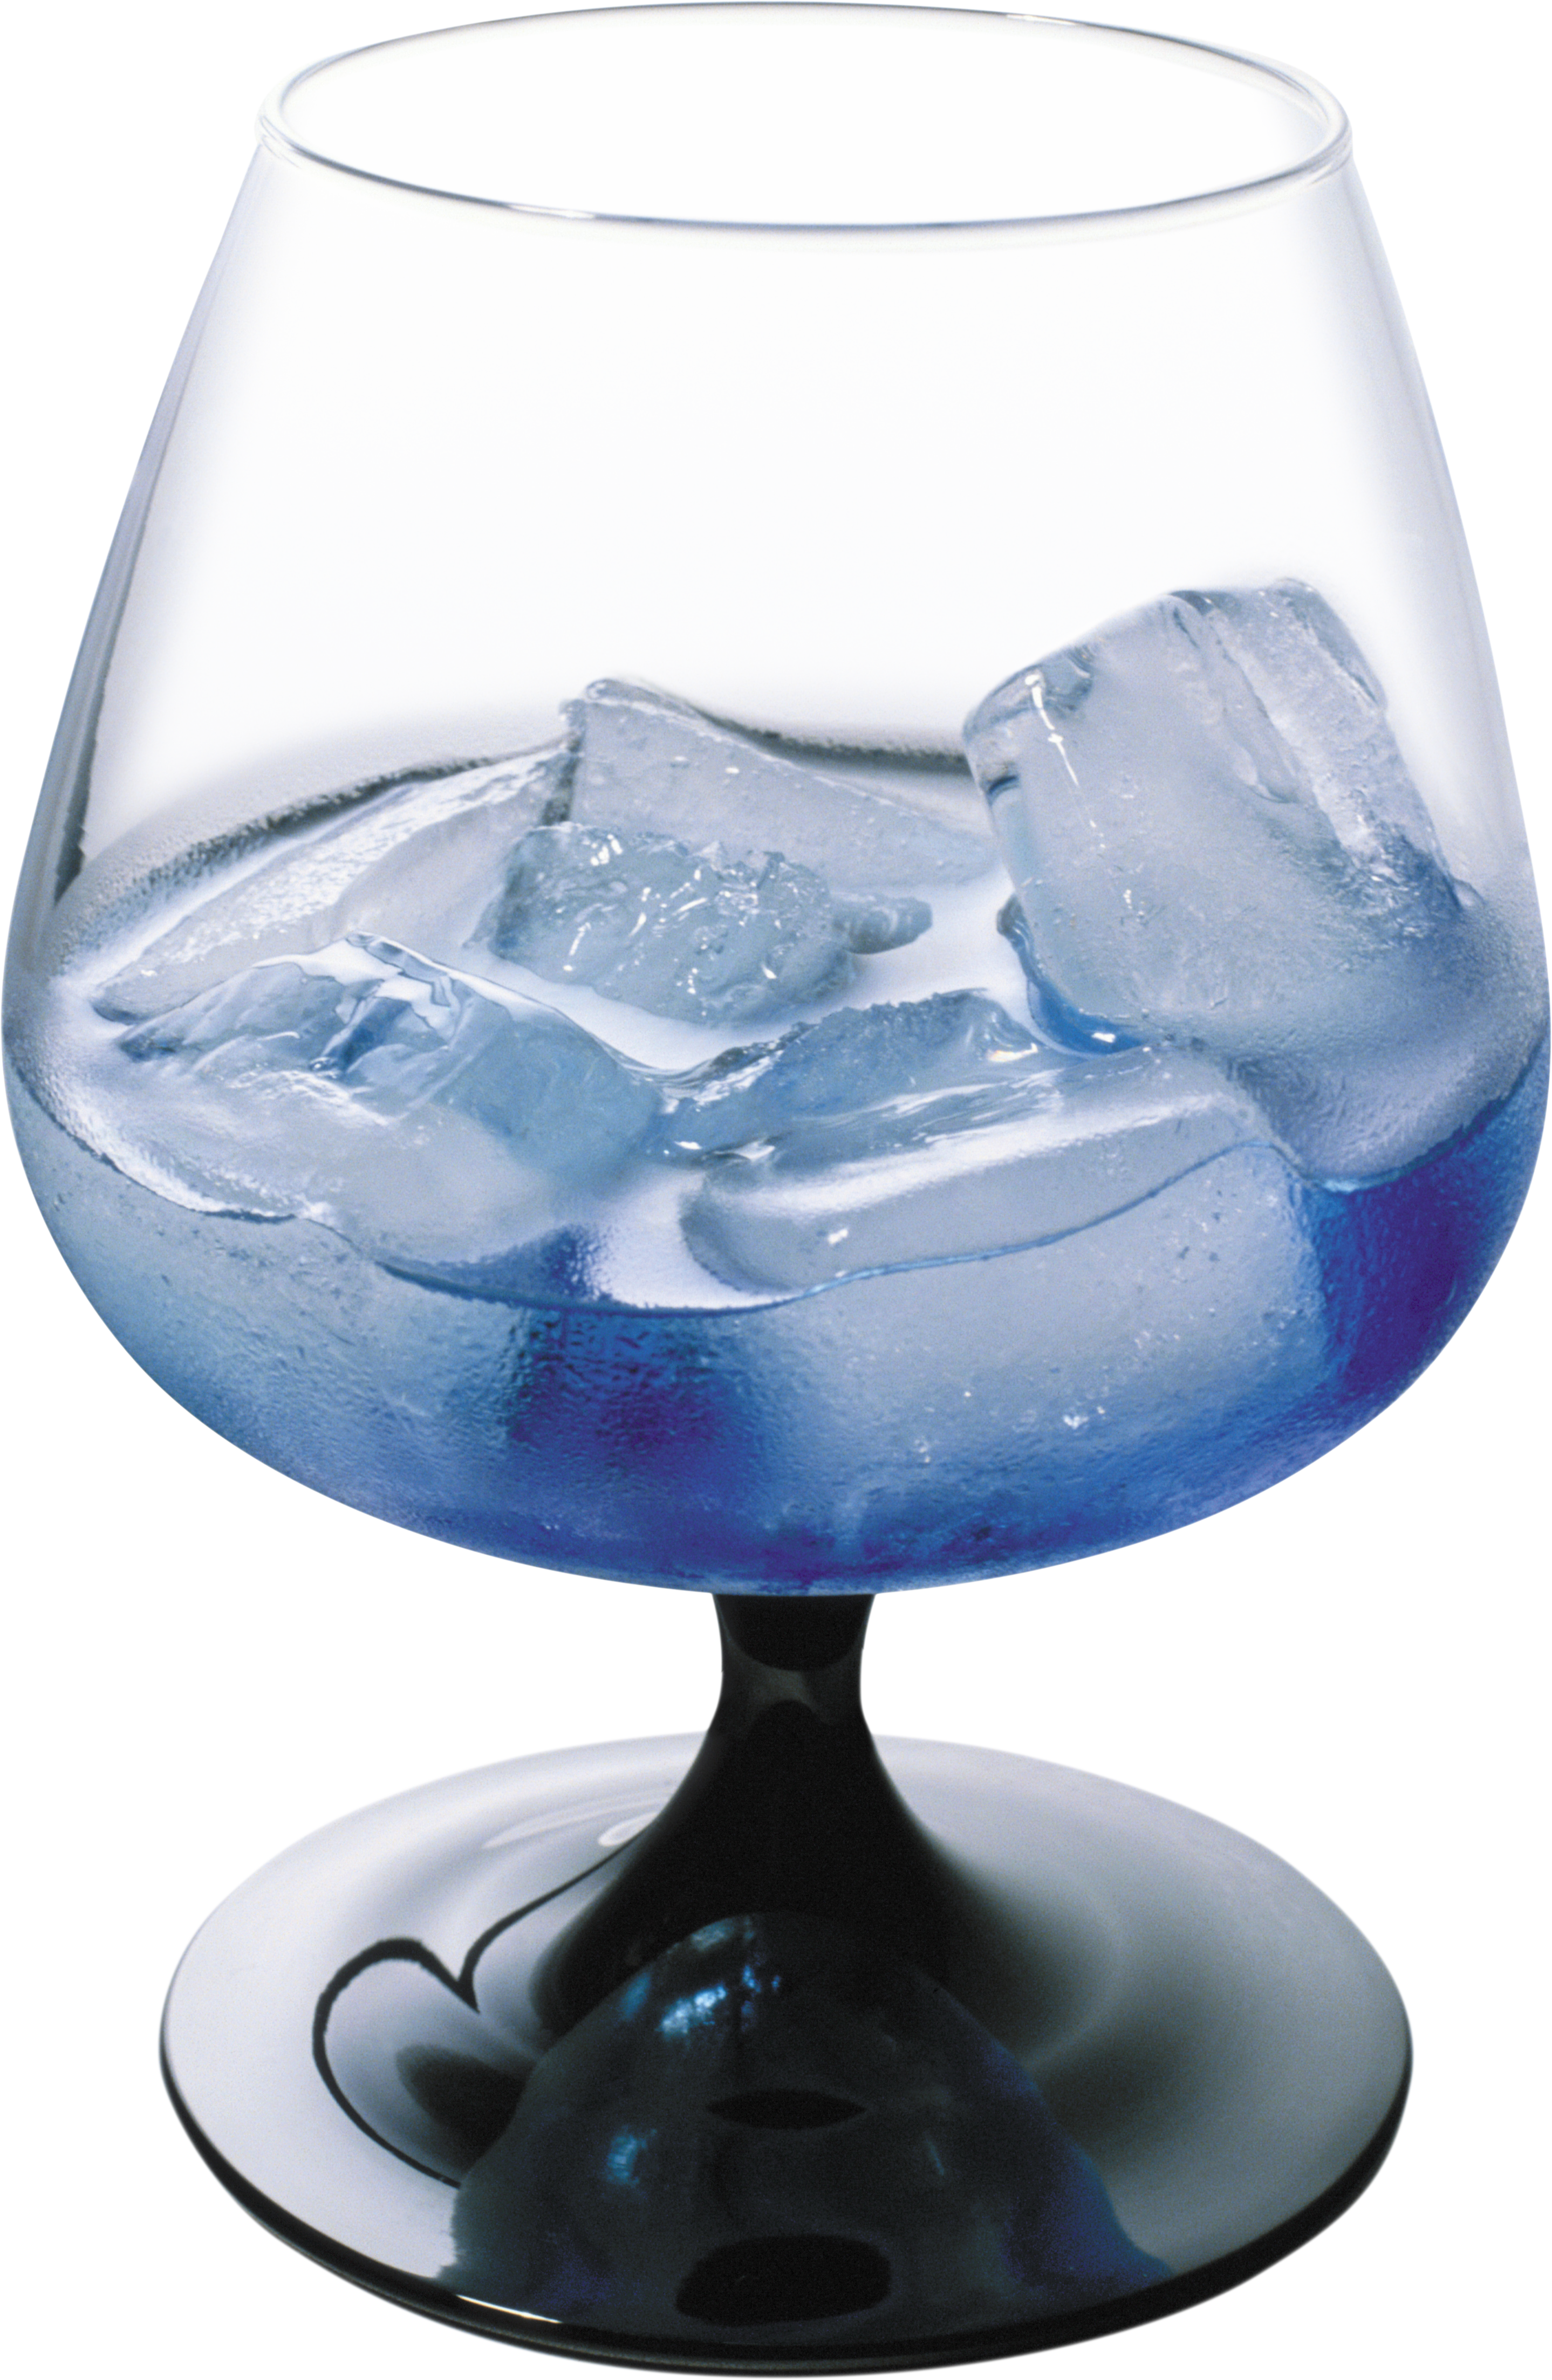 Cocktail PNG image free Download